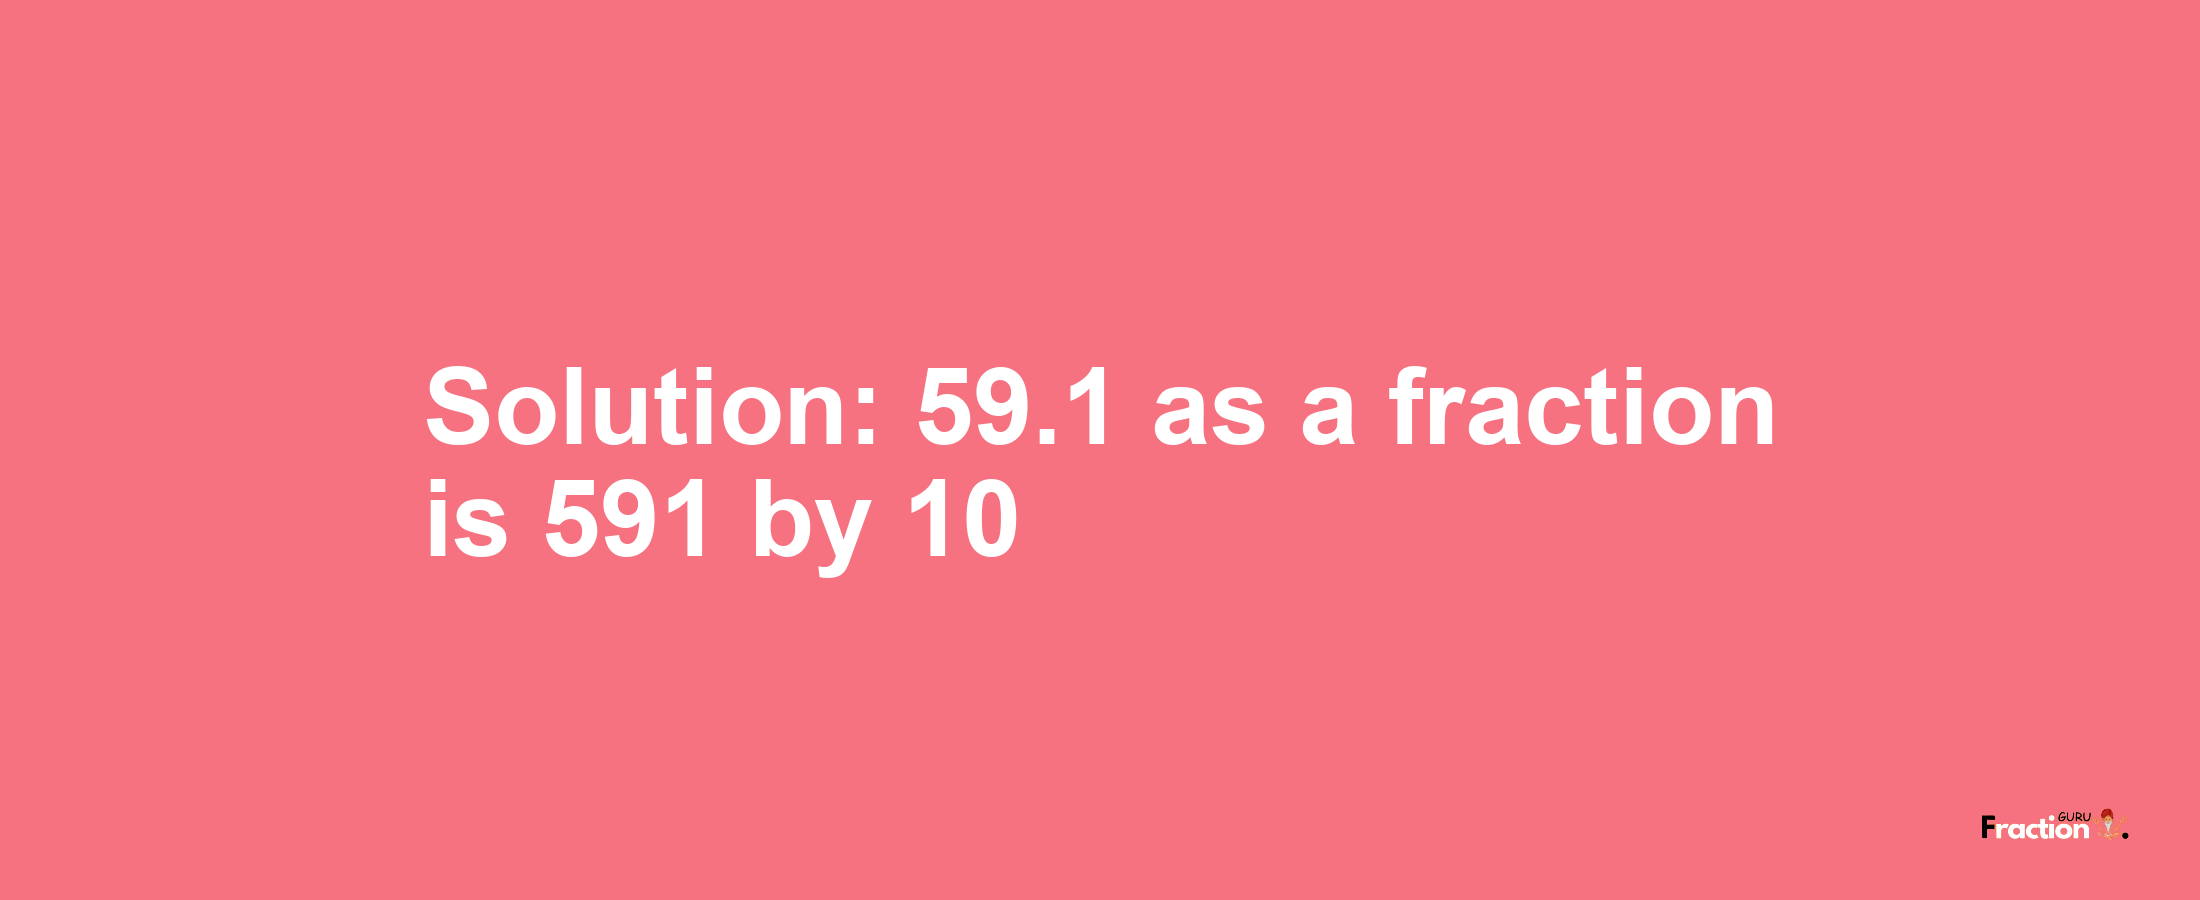 Solution:59.1 as a fraction is 591/10